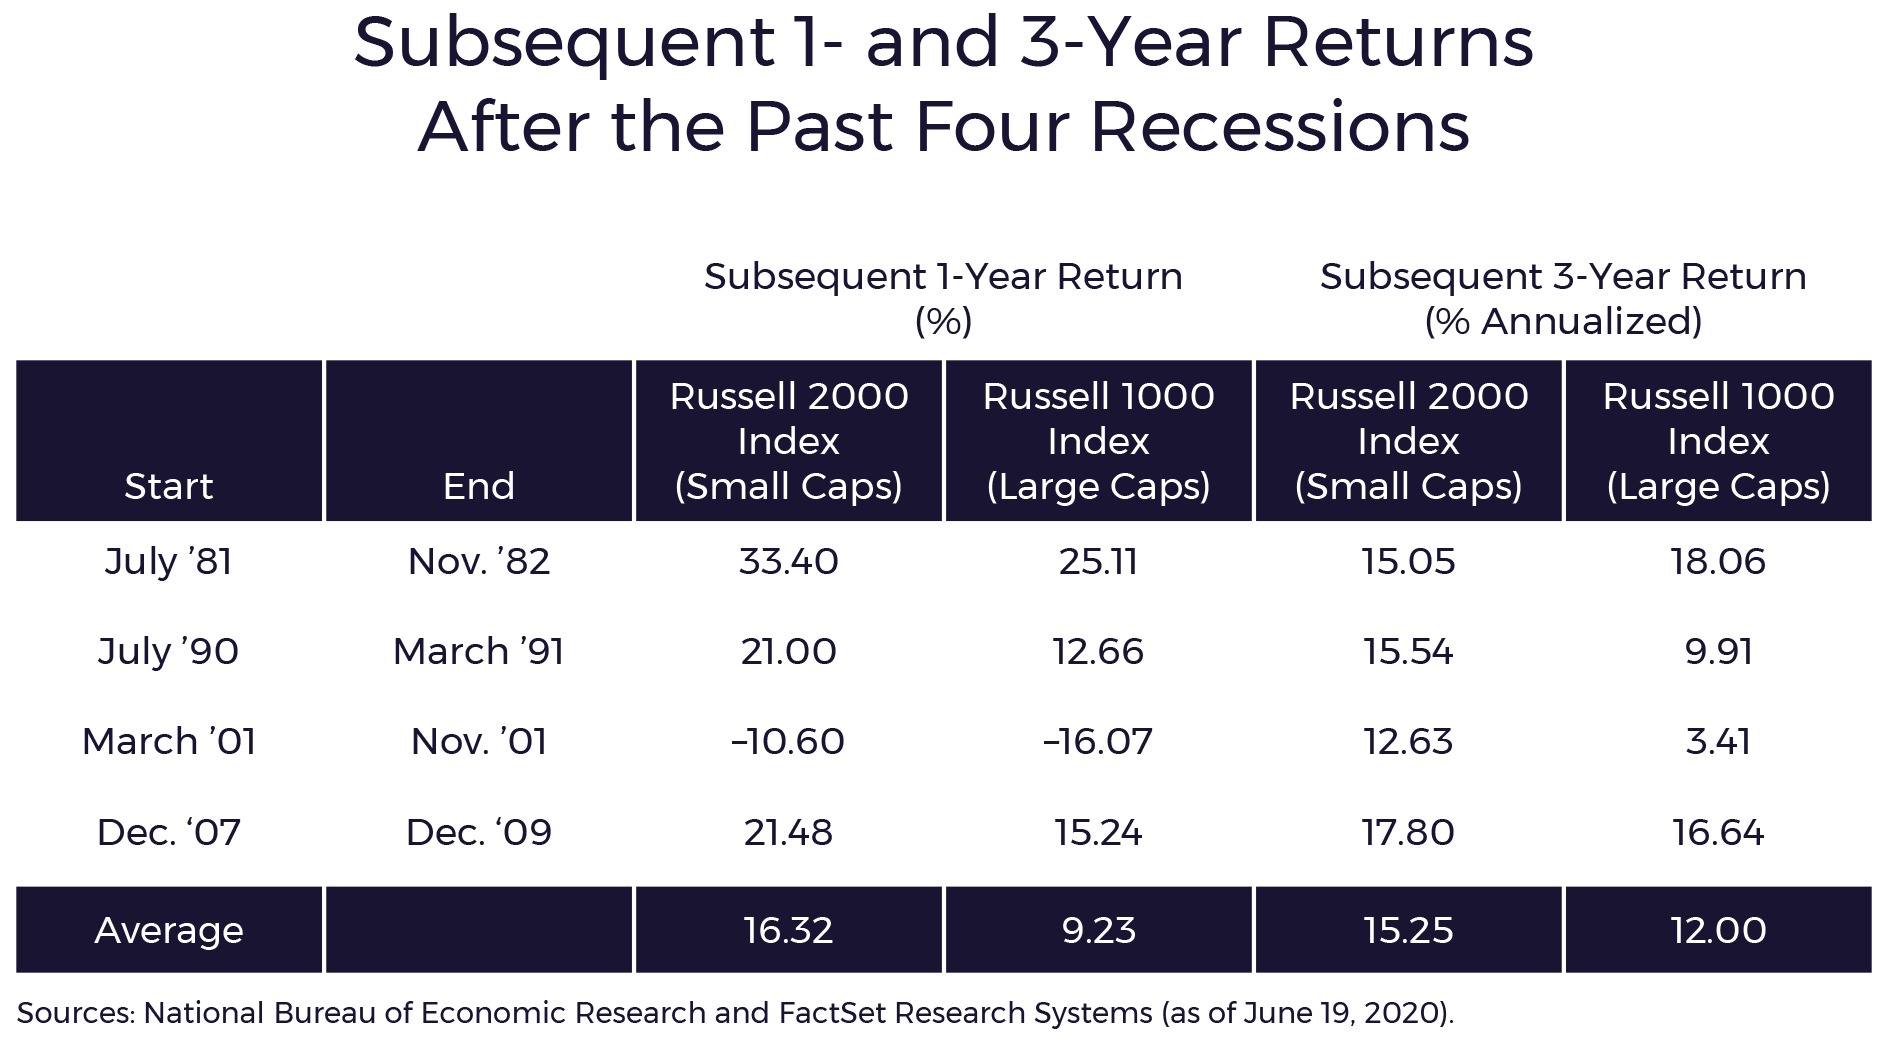 Subsequent 1- and 3-Year Returns After the Past Four Recessions